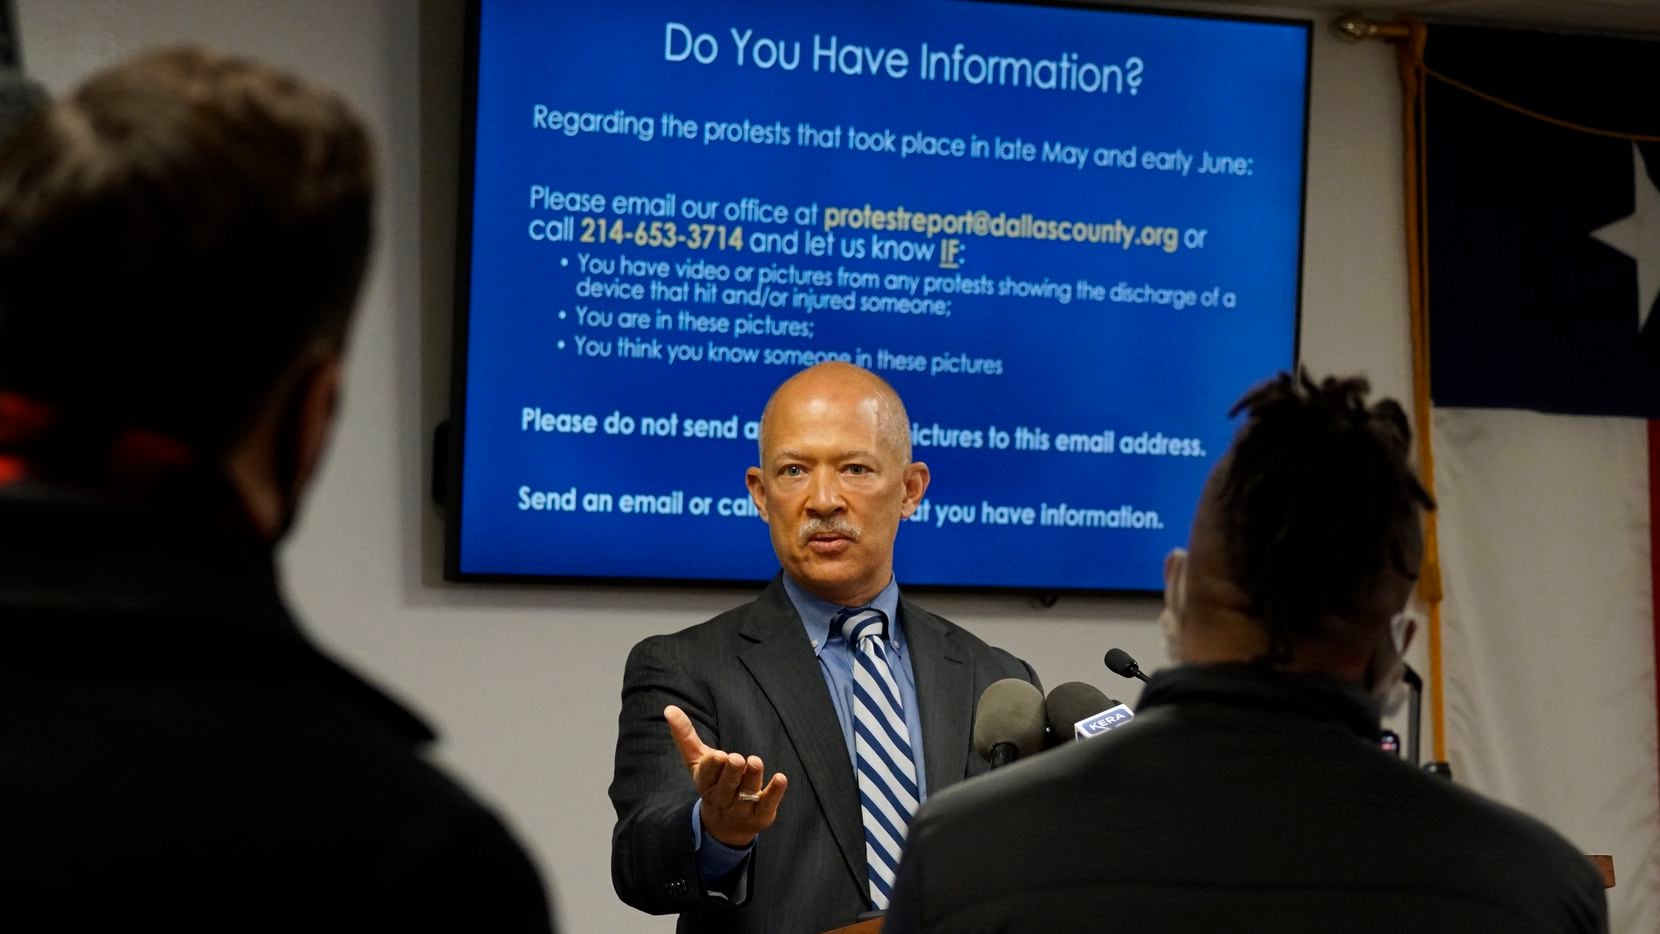 Dallas District Attorney John Creuzot seeks help tracking down images and videos that...